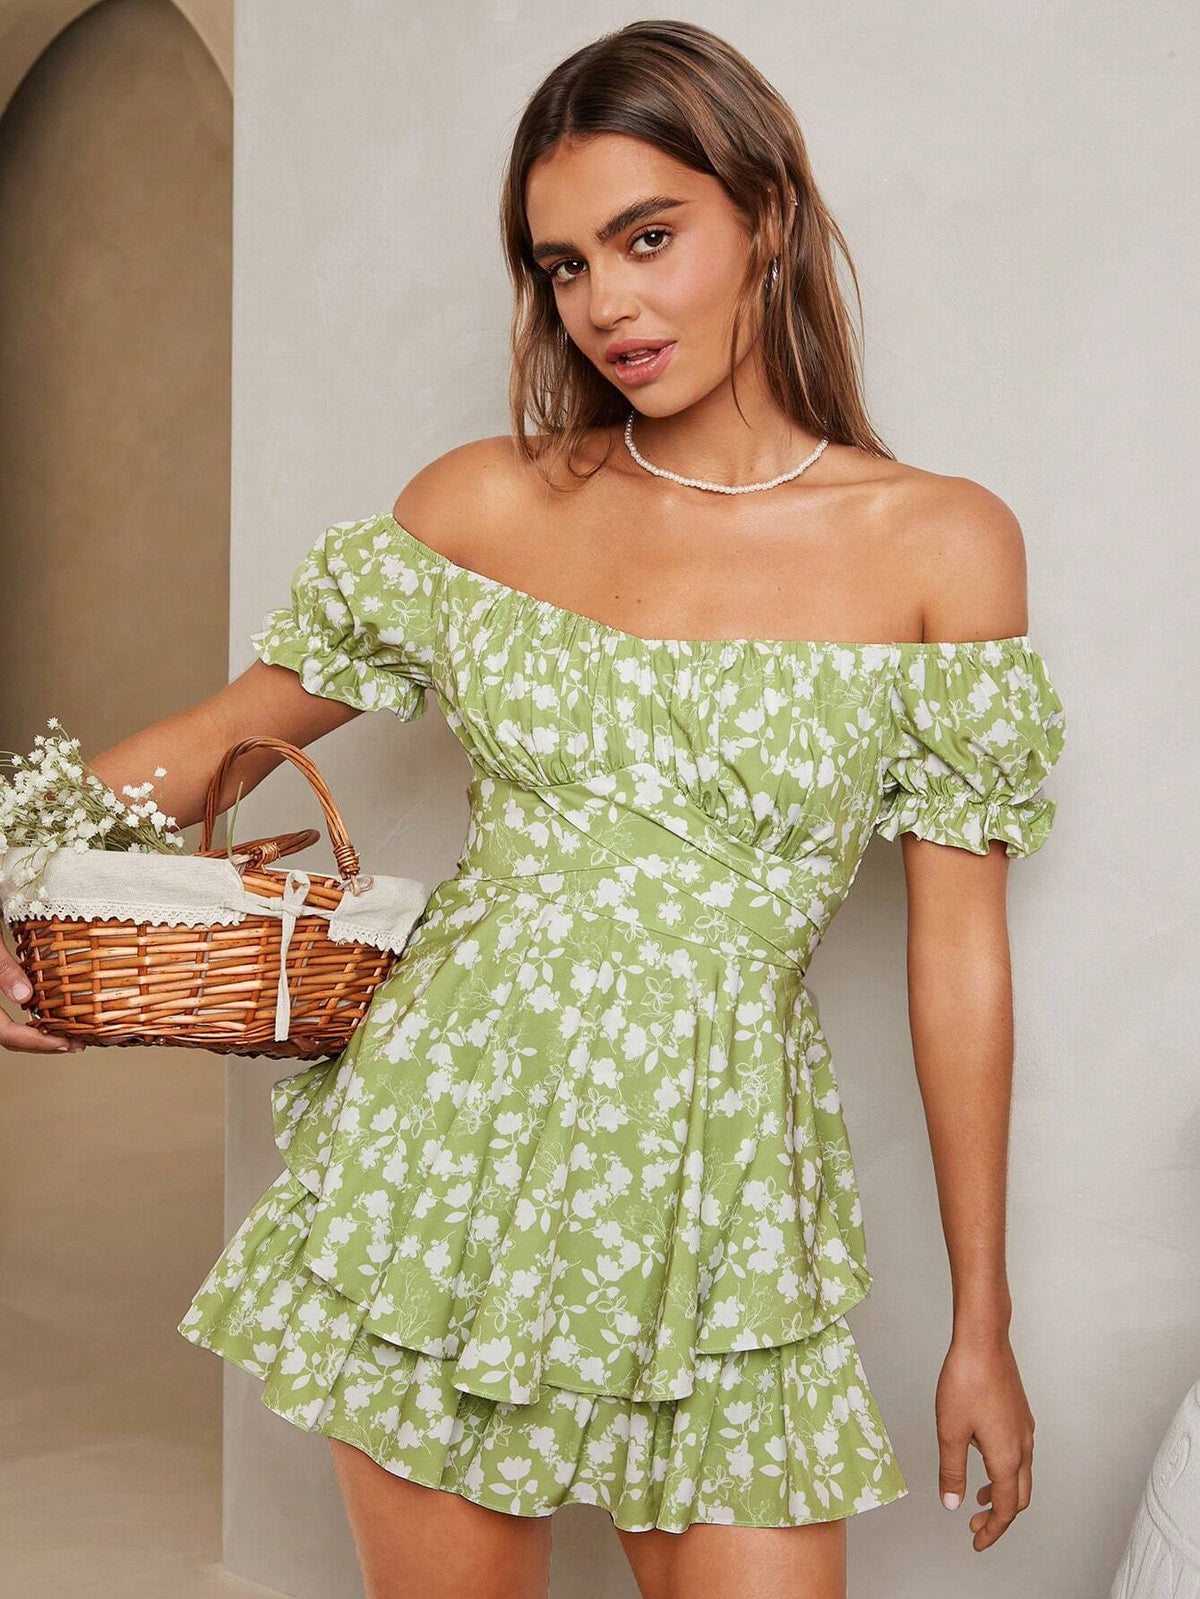 Women's Romantic Countryside Style Bubble Sleeve Jumpsuit With Off-Shoulder, Ruffle Hem And Short Pants, Perfect For Summer Vacation